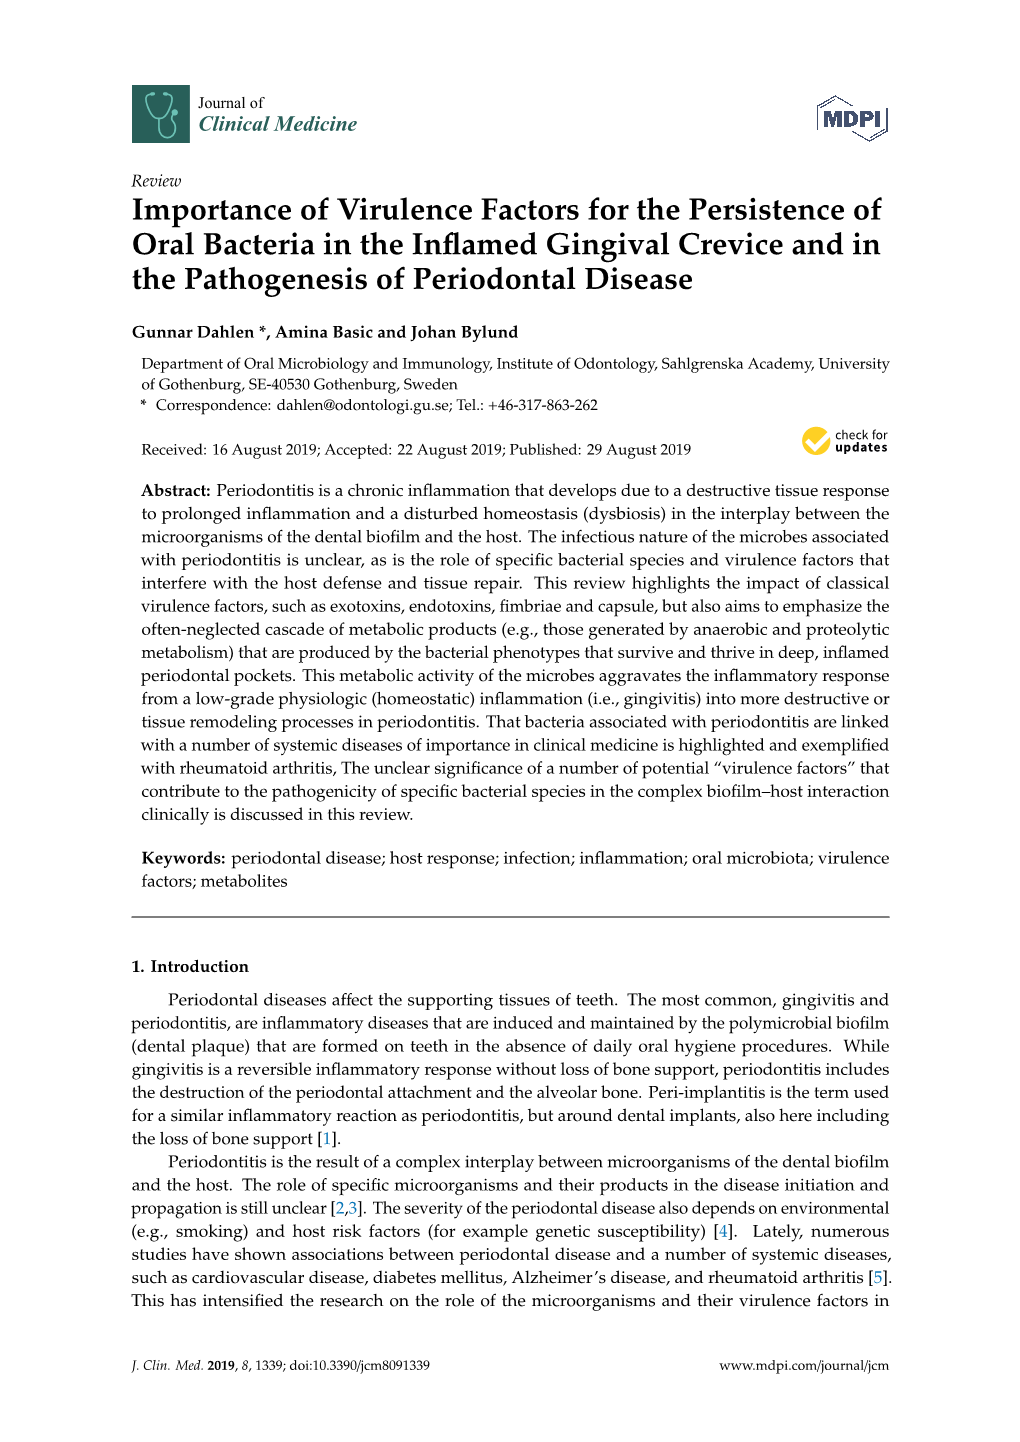 Importance of Virulence Factors for the Persistence of Oral Bacteria in the Inﬂamed Gingival Crevice and in the Pathogenesis of Periodontal Disease